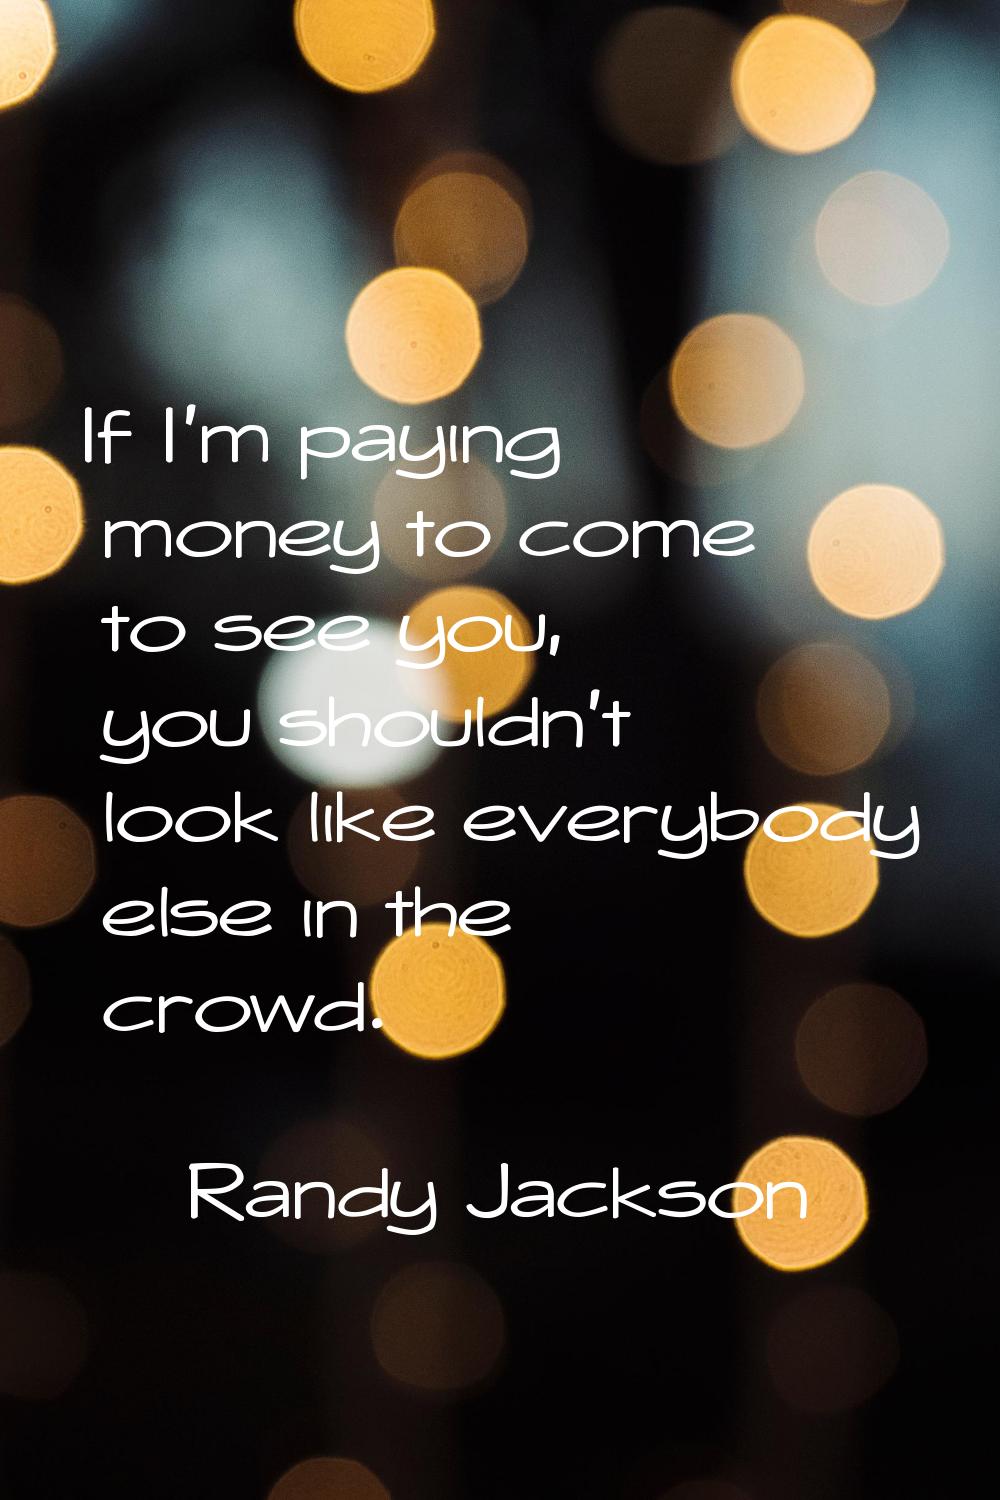 If I'm paying money to come to see you, you shouldn't look like everybody else in the crowd.